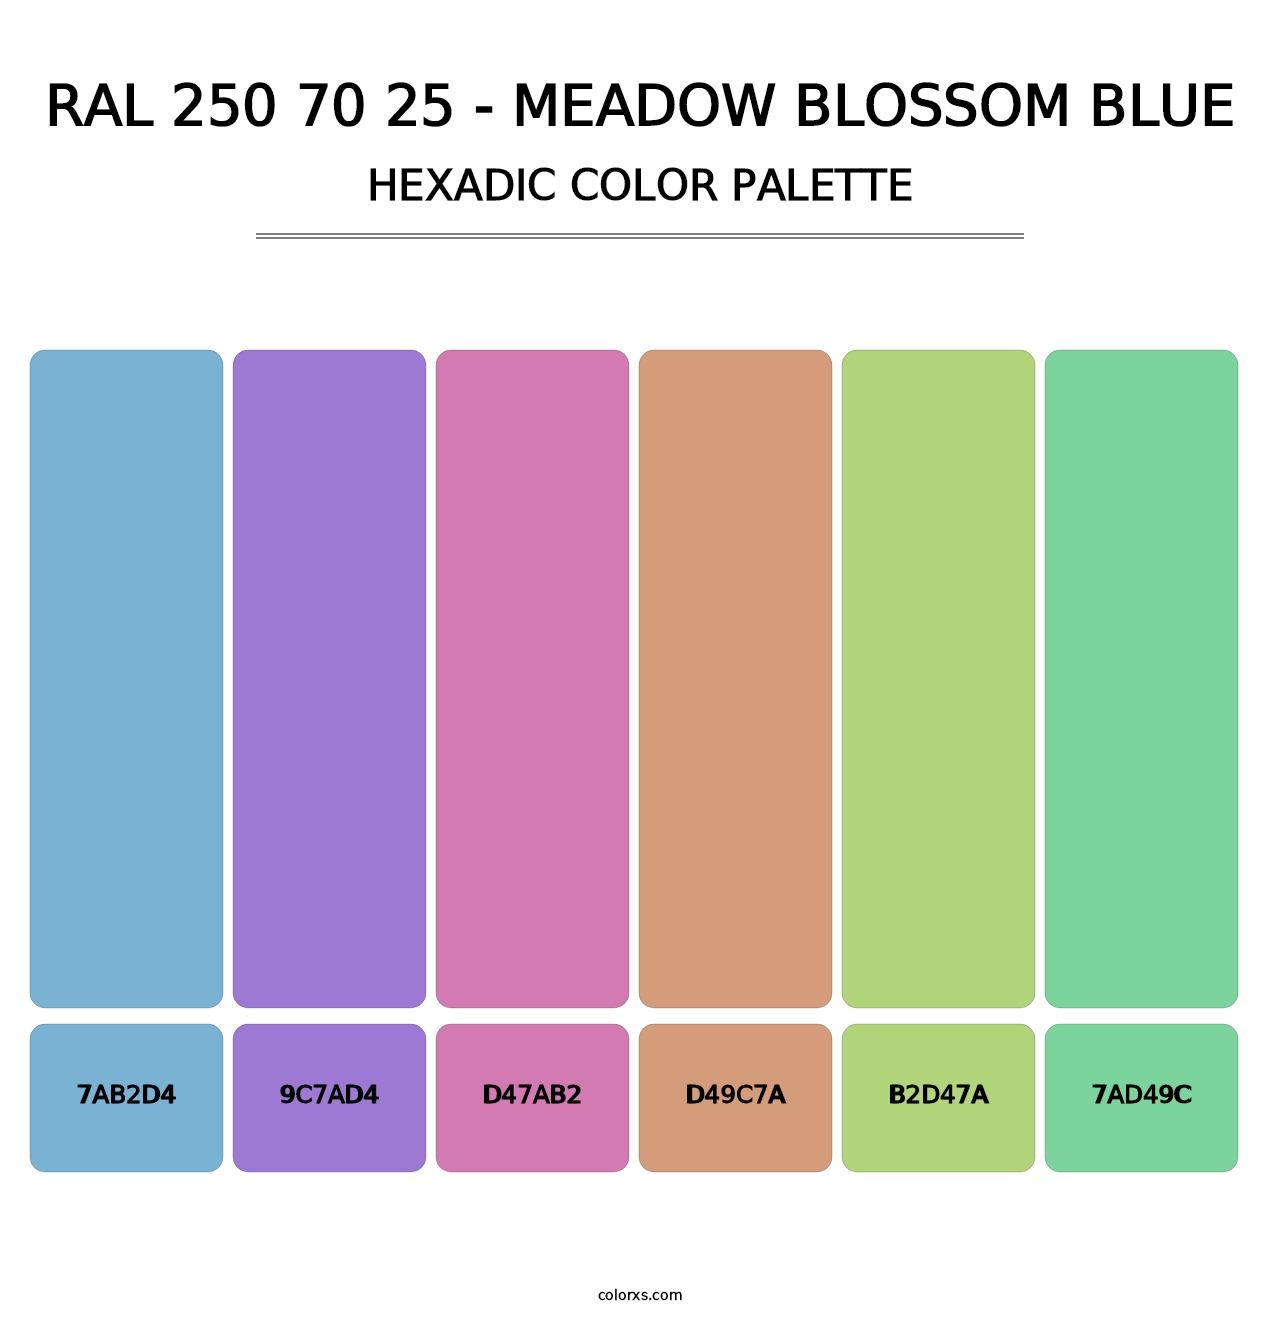 RAL 250 70 25 - Meadow Blossom Blue - Hexadic Color Palette